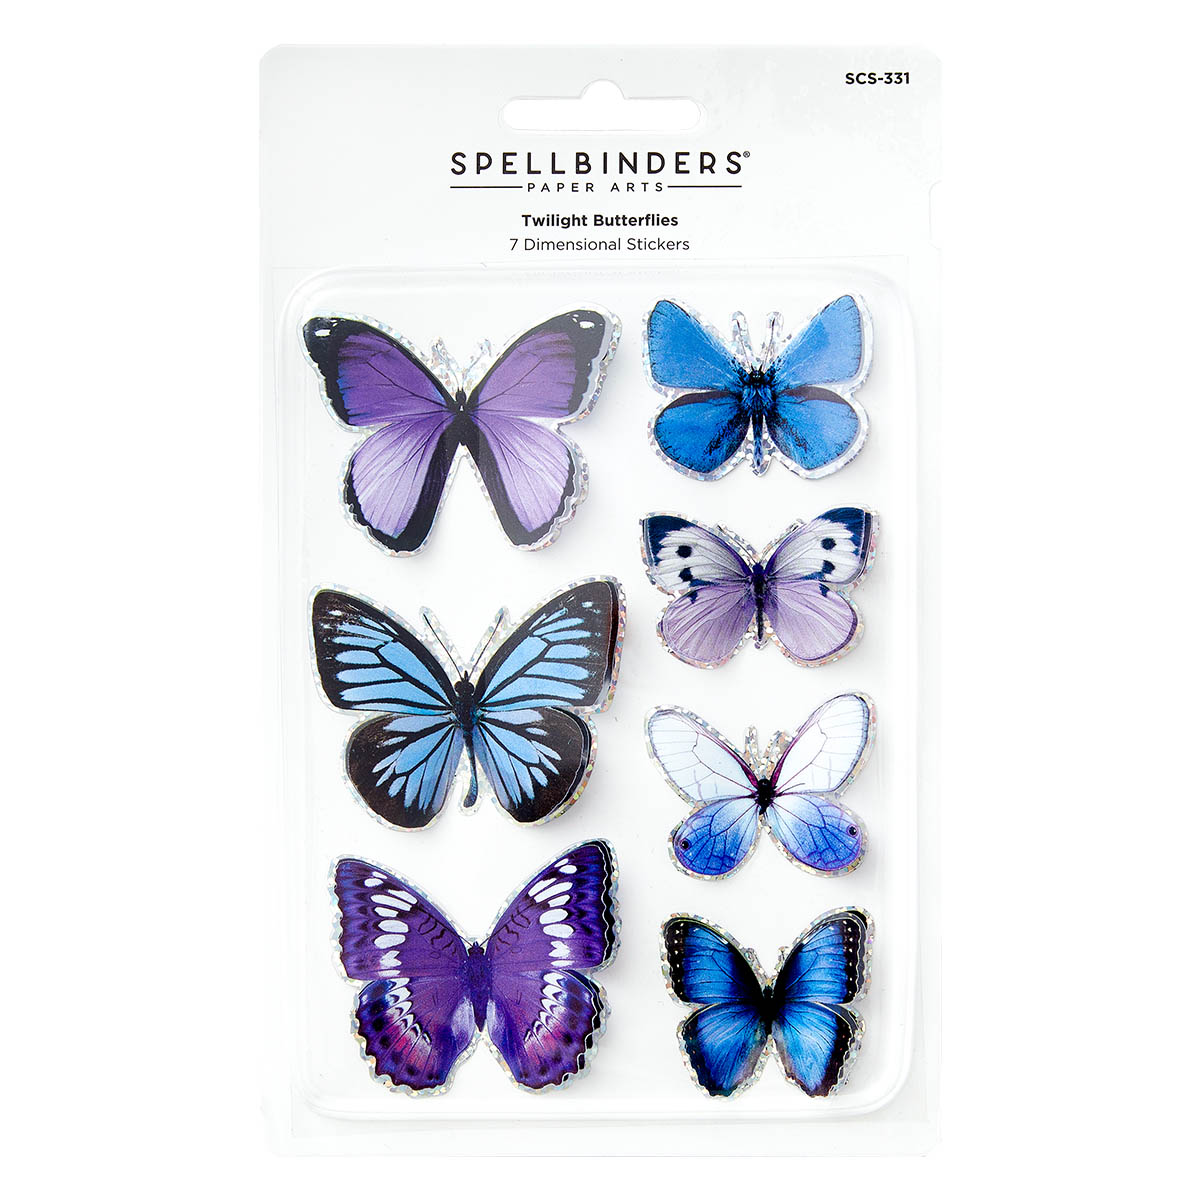 Spellbinders Twilight Butterflies Stickers From the Timeless Collection